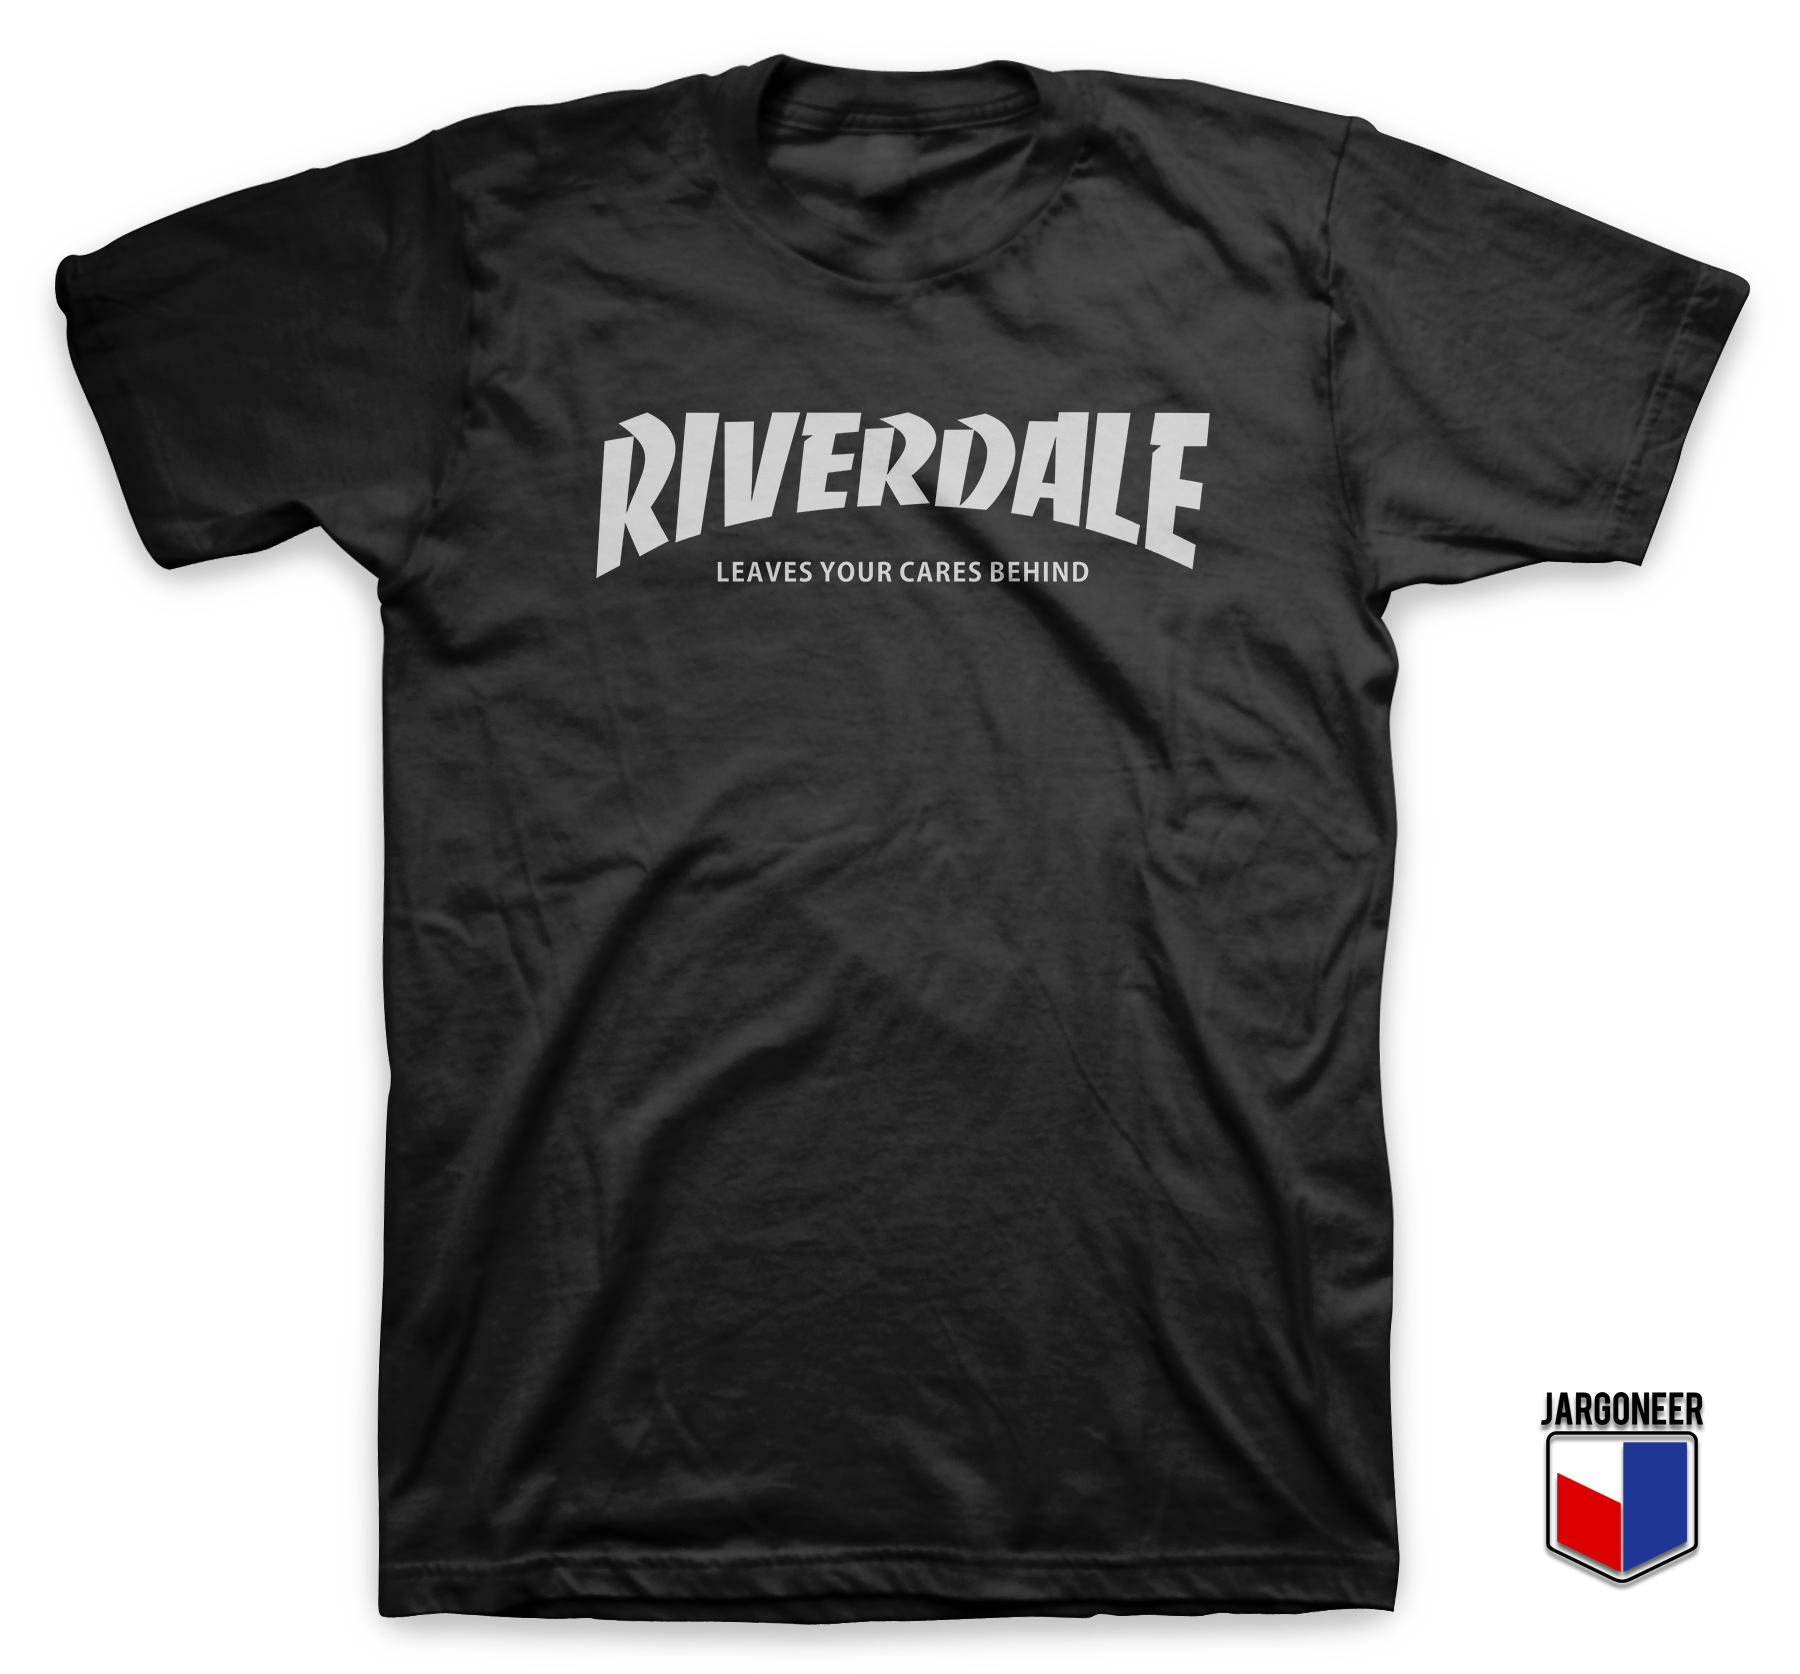 Riverdale - Leaves Your Cares Behind T-Shirt | Ideas T-Shirt | Cool ...